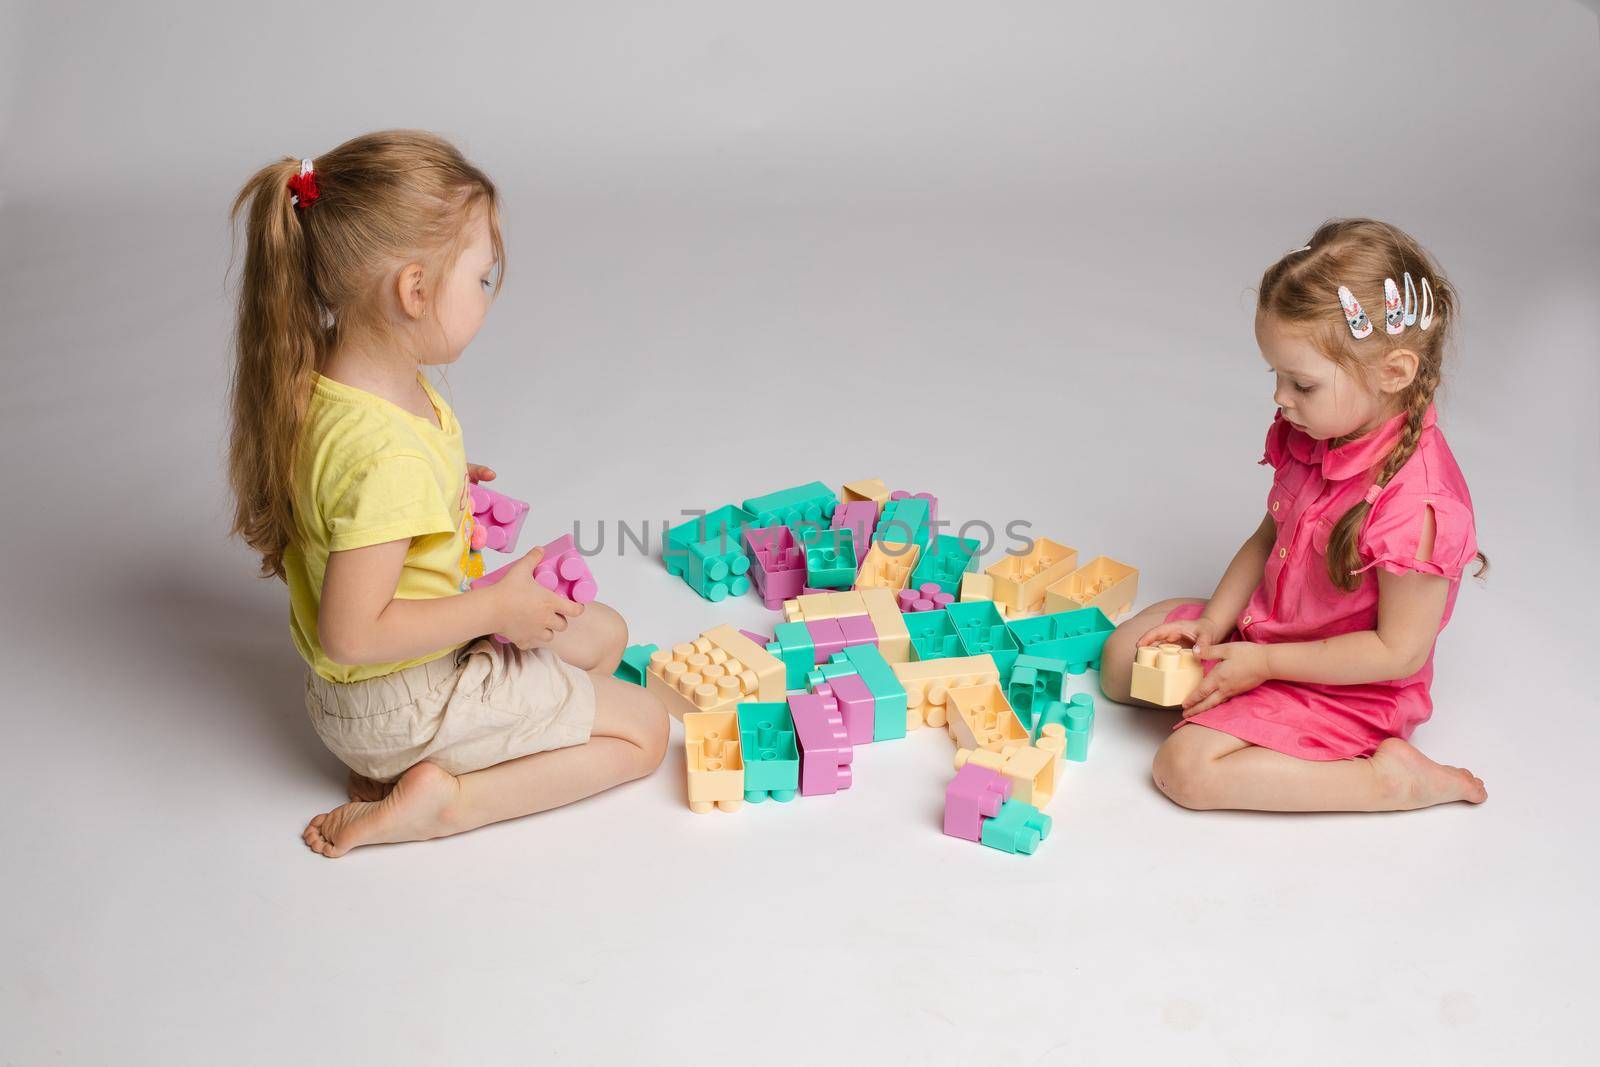 Two girls sitting on floor and playing with building blocks by StudioLucky